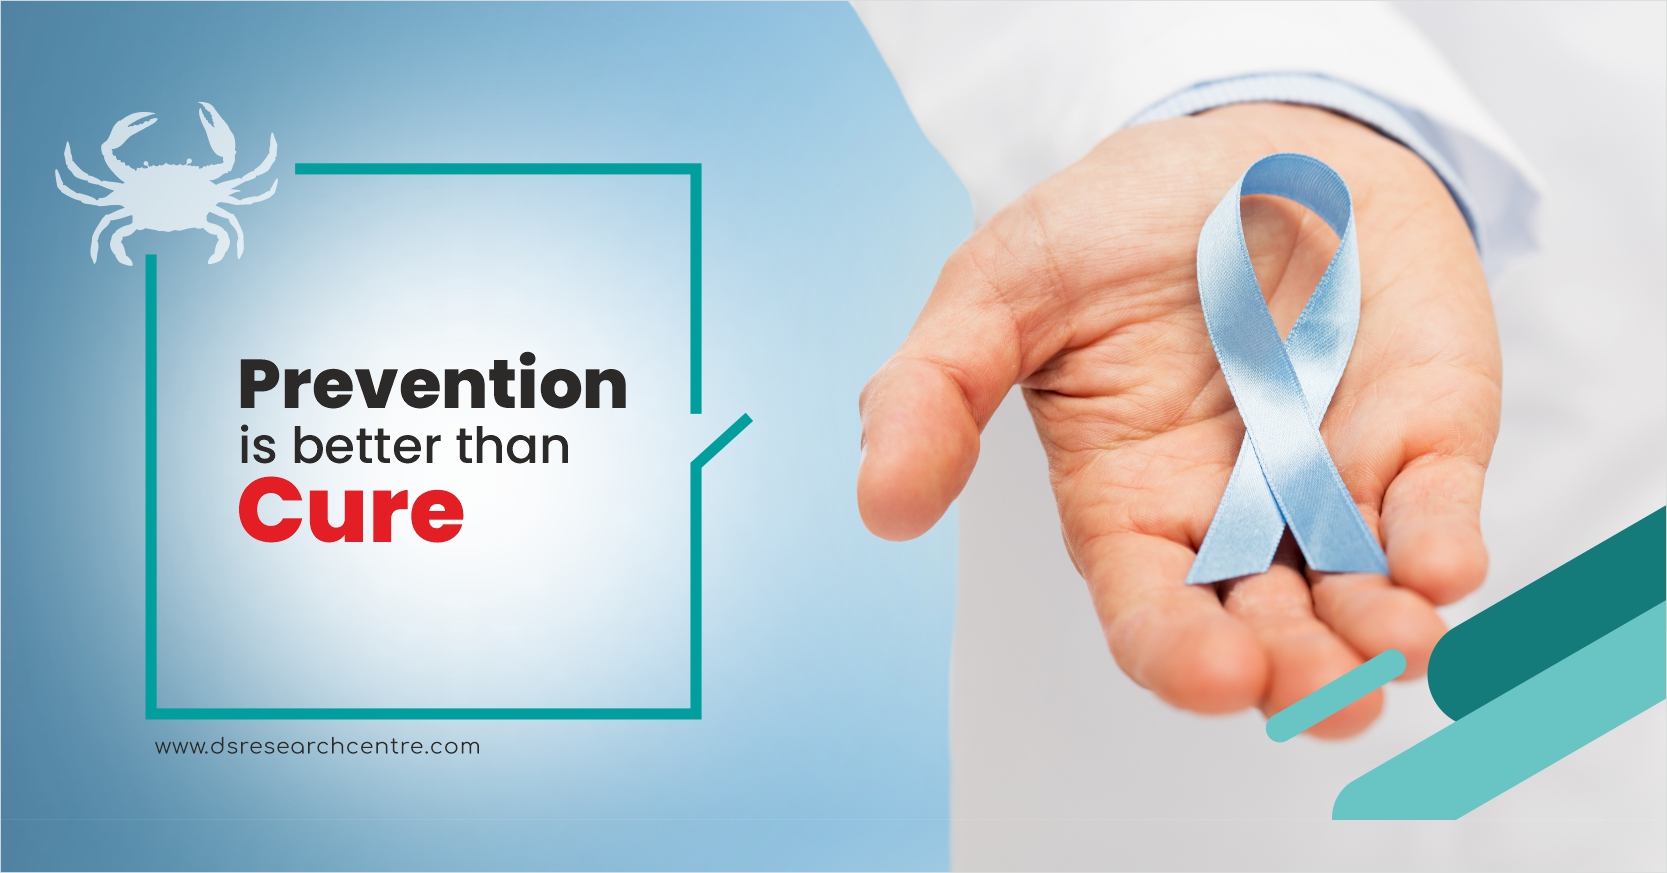 "Even Best Ayurvedic Cancer Hospital says: Prevention is better than cure" - Here's Why....